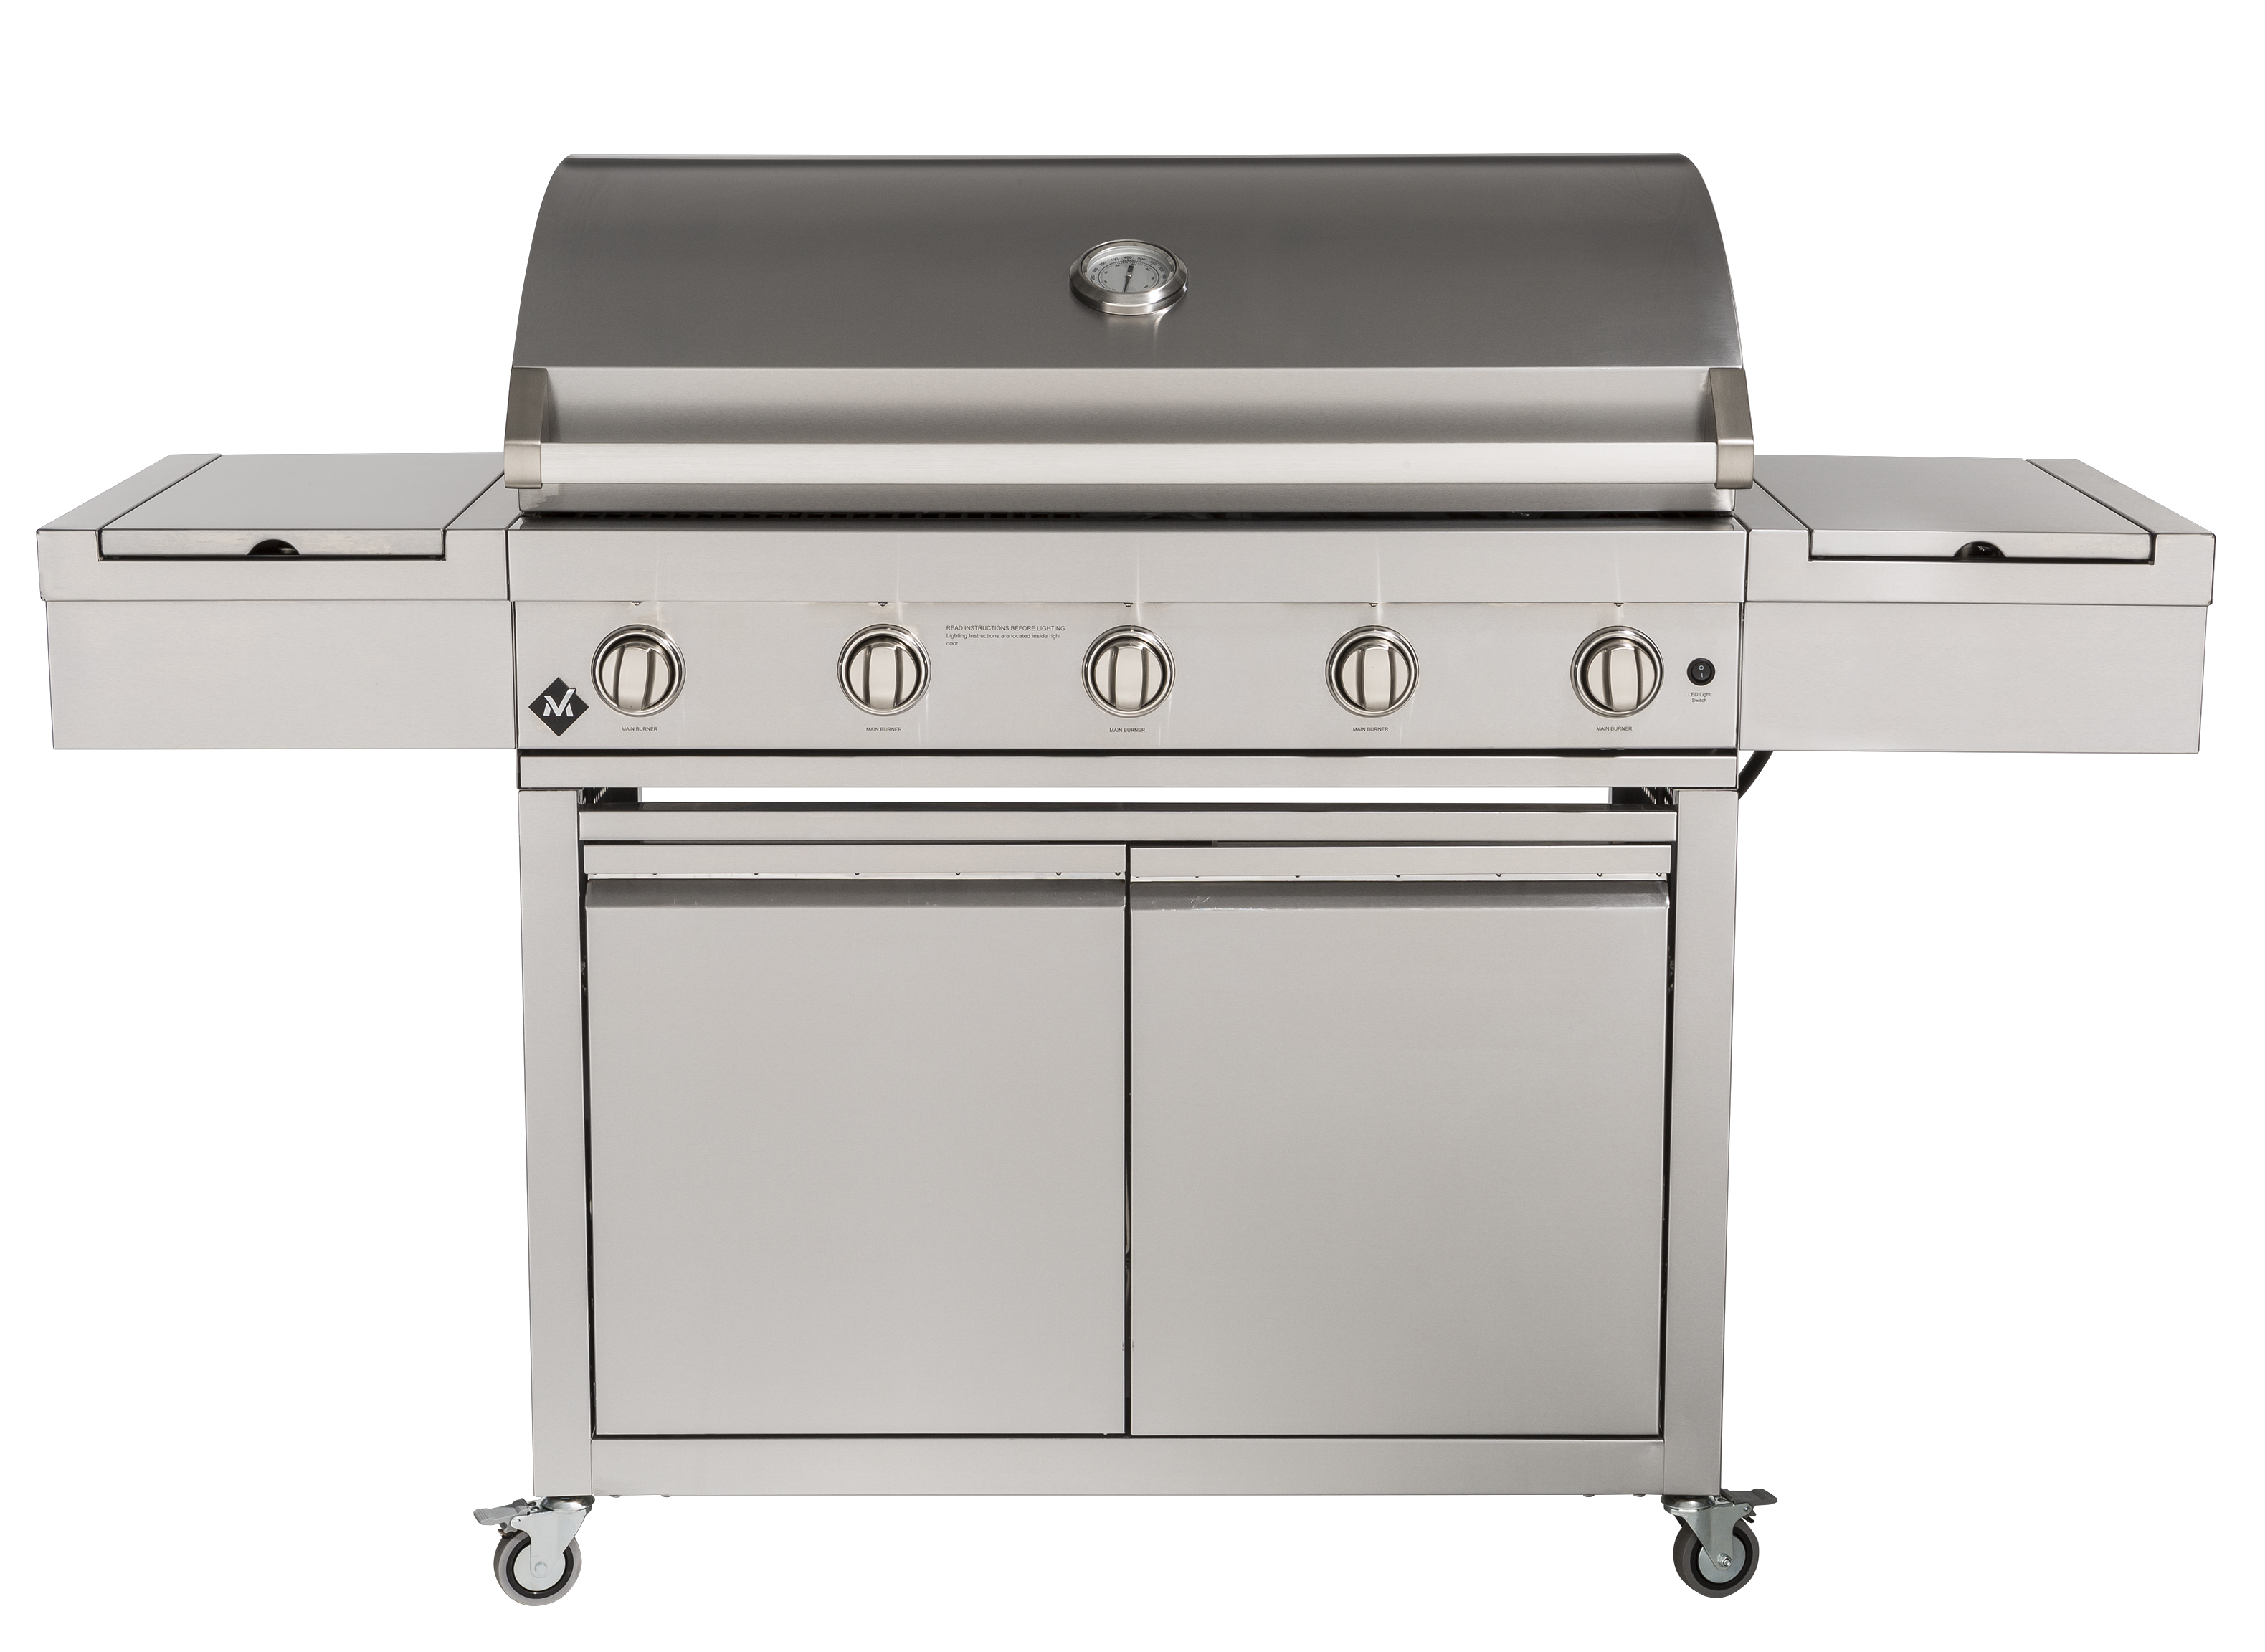 https://crdms.images.consumerreports.org/prod/products/cr/models/398219-gas-grills-member-s-mark-gt-elite-gt05sir-sb-lp-sam-s-club-10004733.png